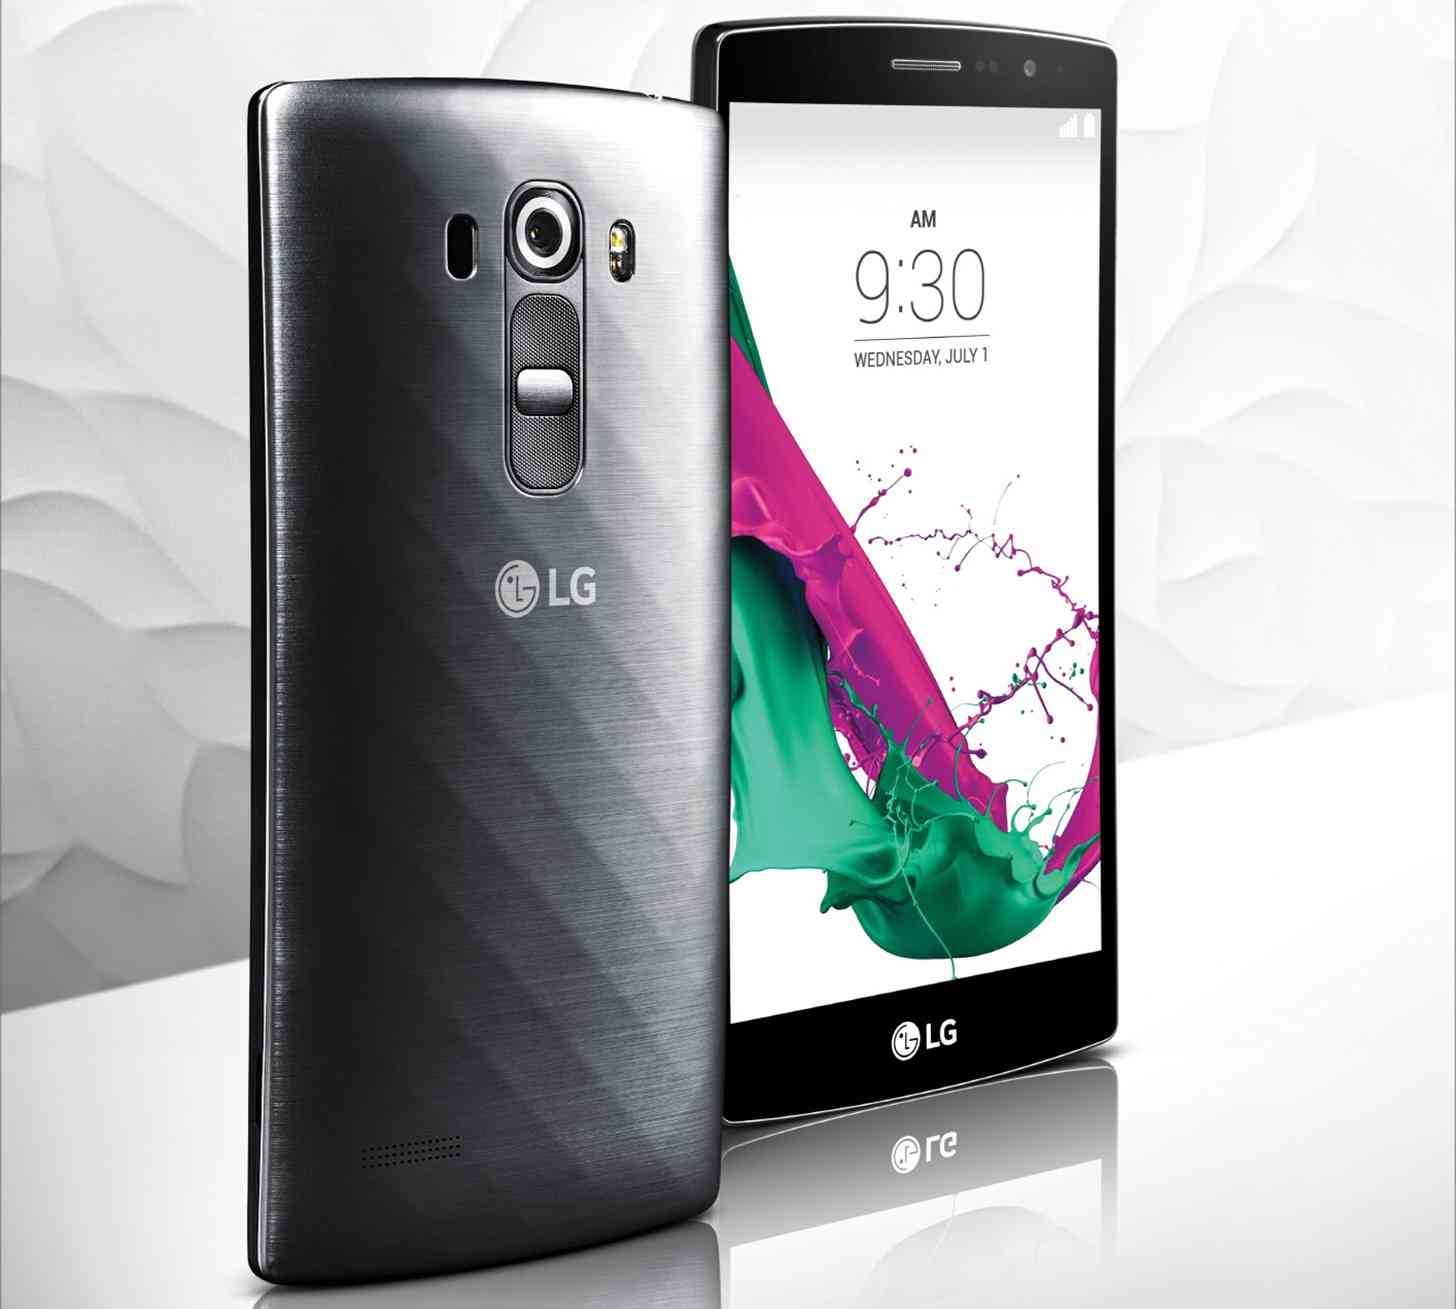 LG G4 Beat official large